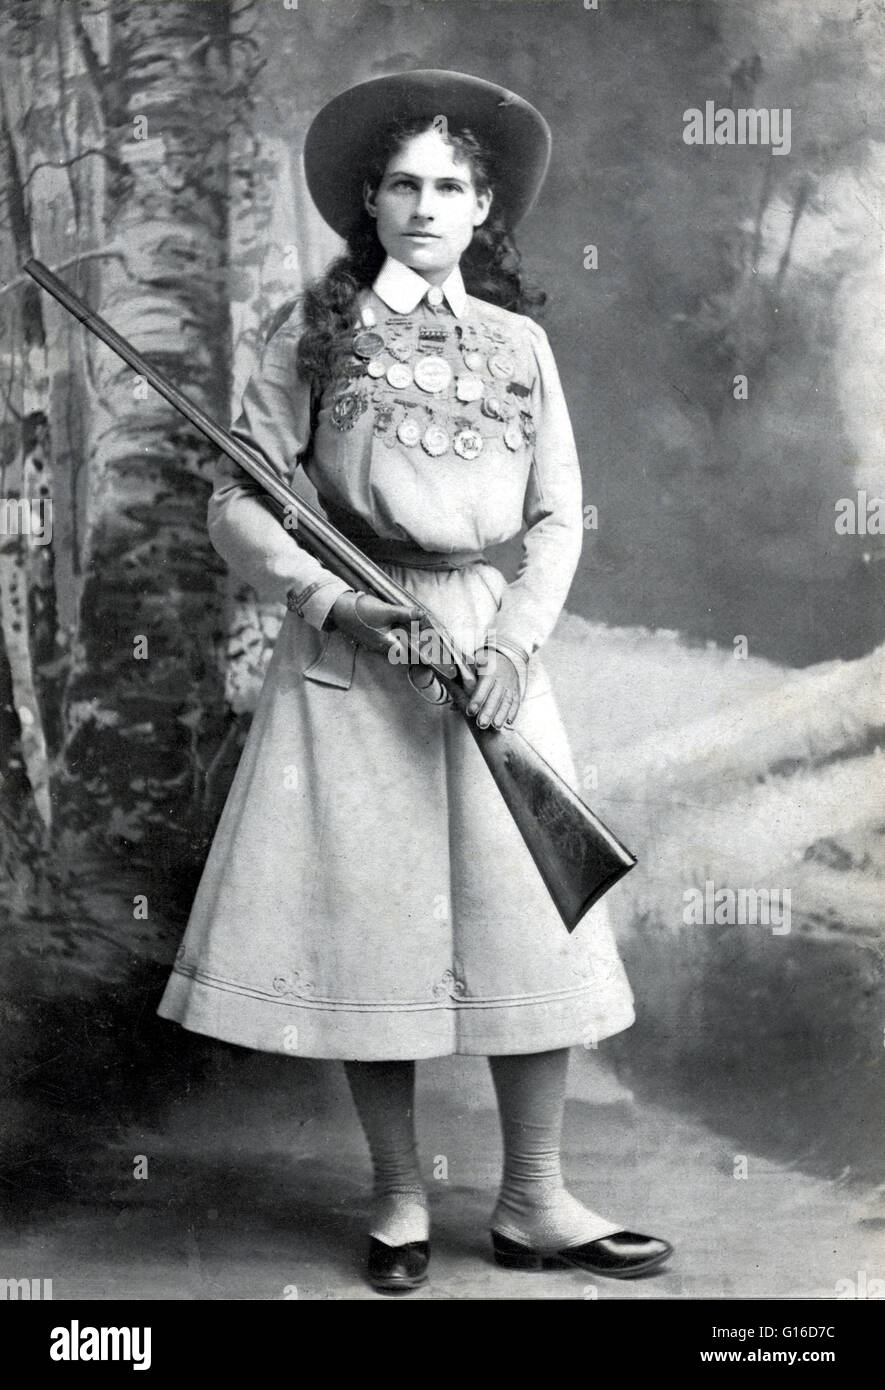 Sharpshooter Annie Oakley, holding rifle, with many medals pinned across  the top of her dress photographed by Richard Kyle Fox, 1899. Annie Oakley  (August 13, 1860 - November 3, 1926) born Phoebe